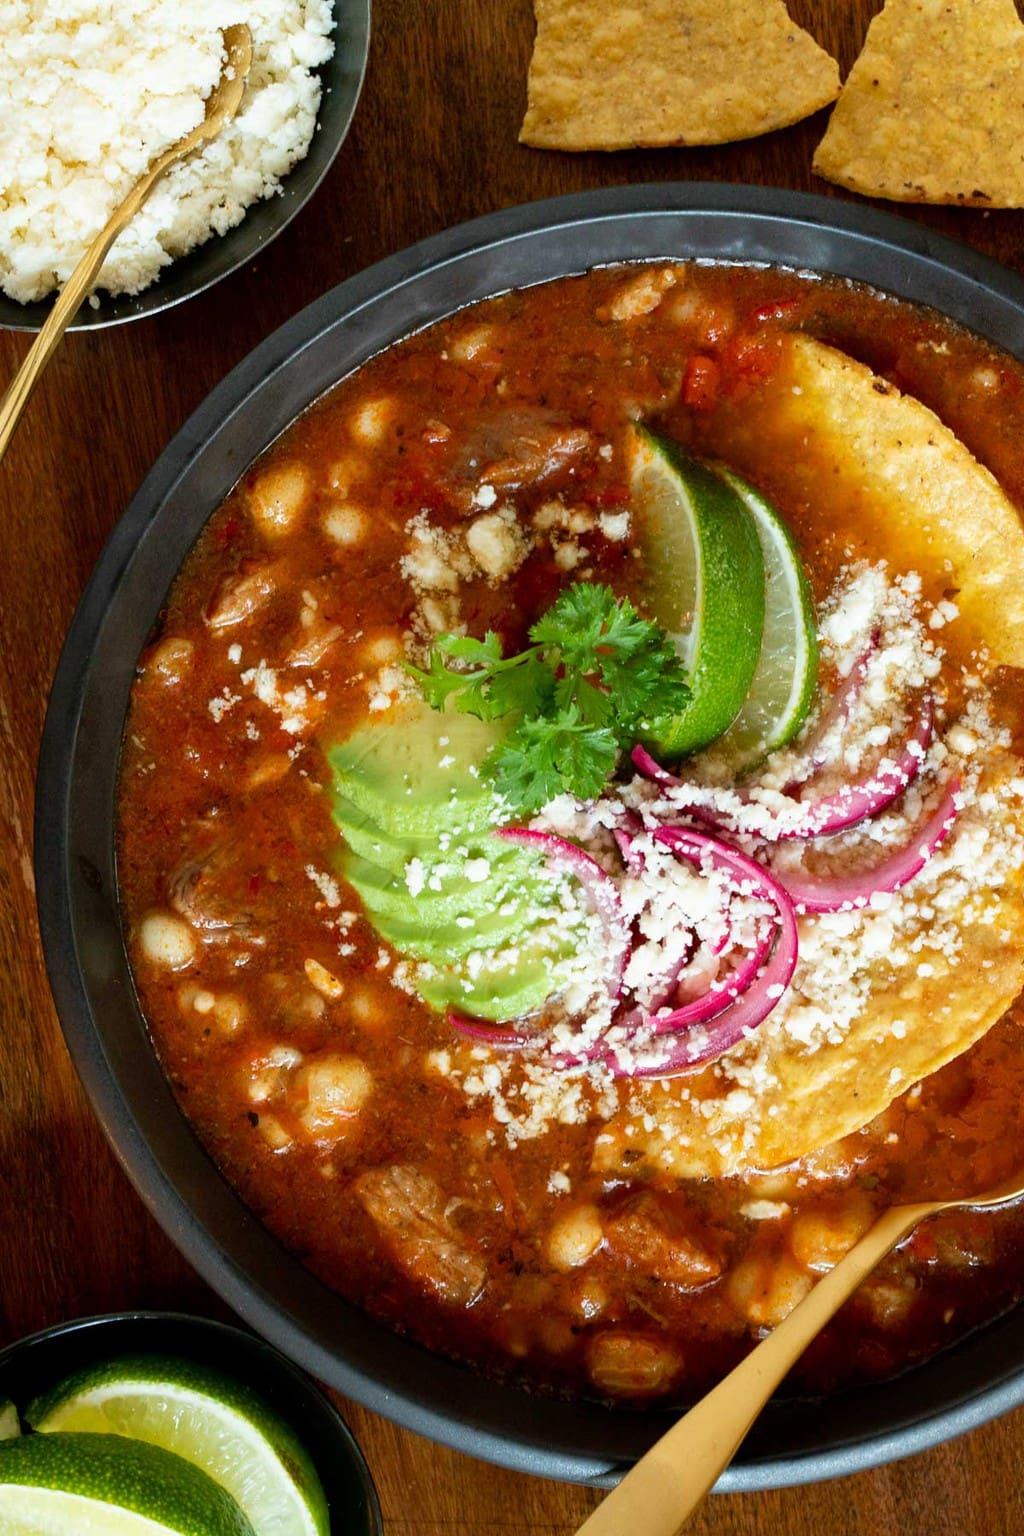 Vertical overhead photo of a bowl of Braised Pork Shoulder Pozole garnished with lime wedges, corn tortillas, sliced avocado, red onions and cilantro.